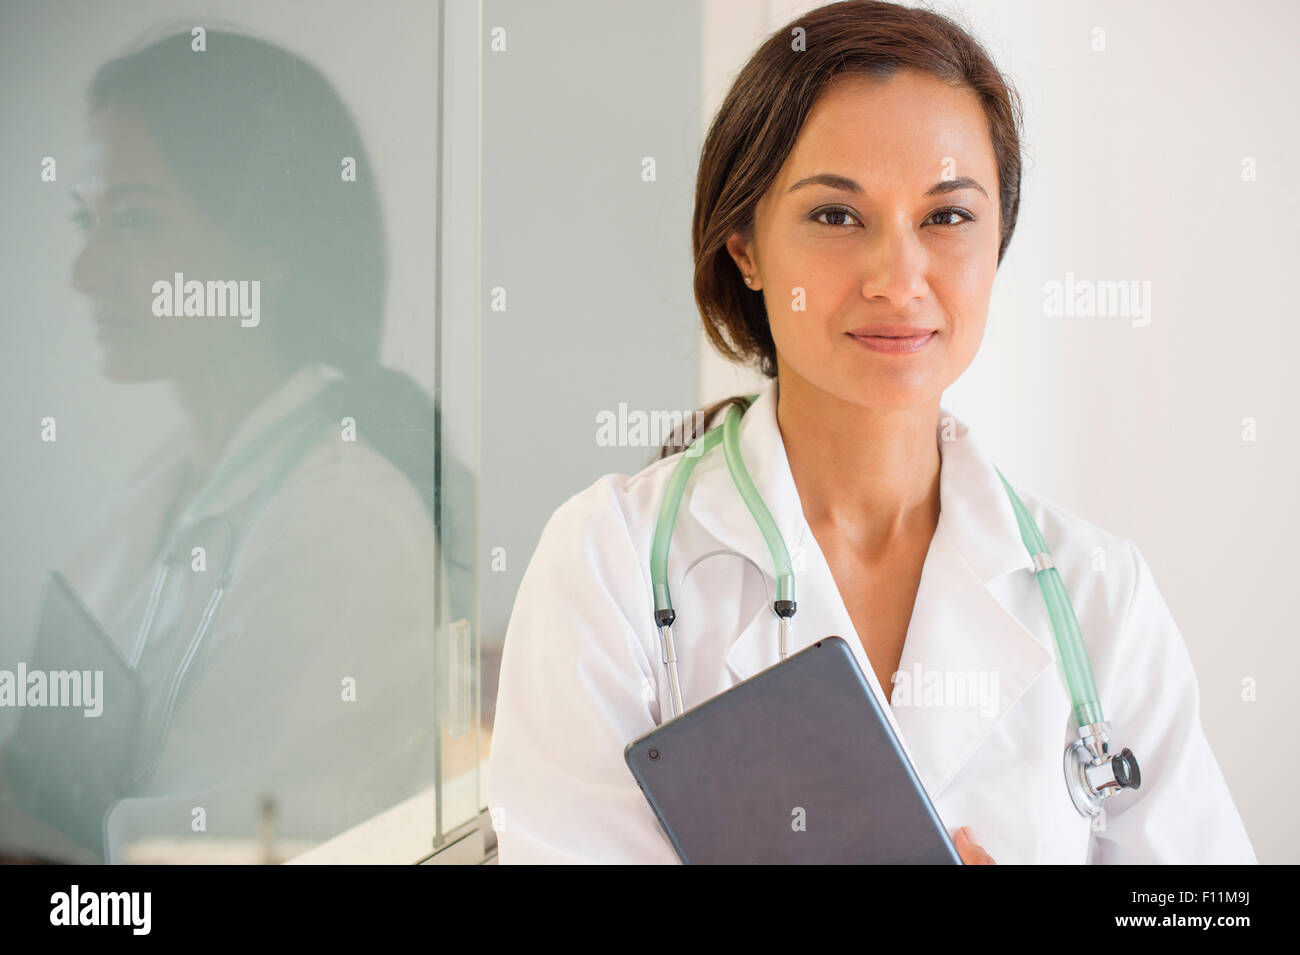 Mixed race doctor holding digital tablet Stock Photo